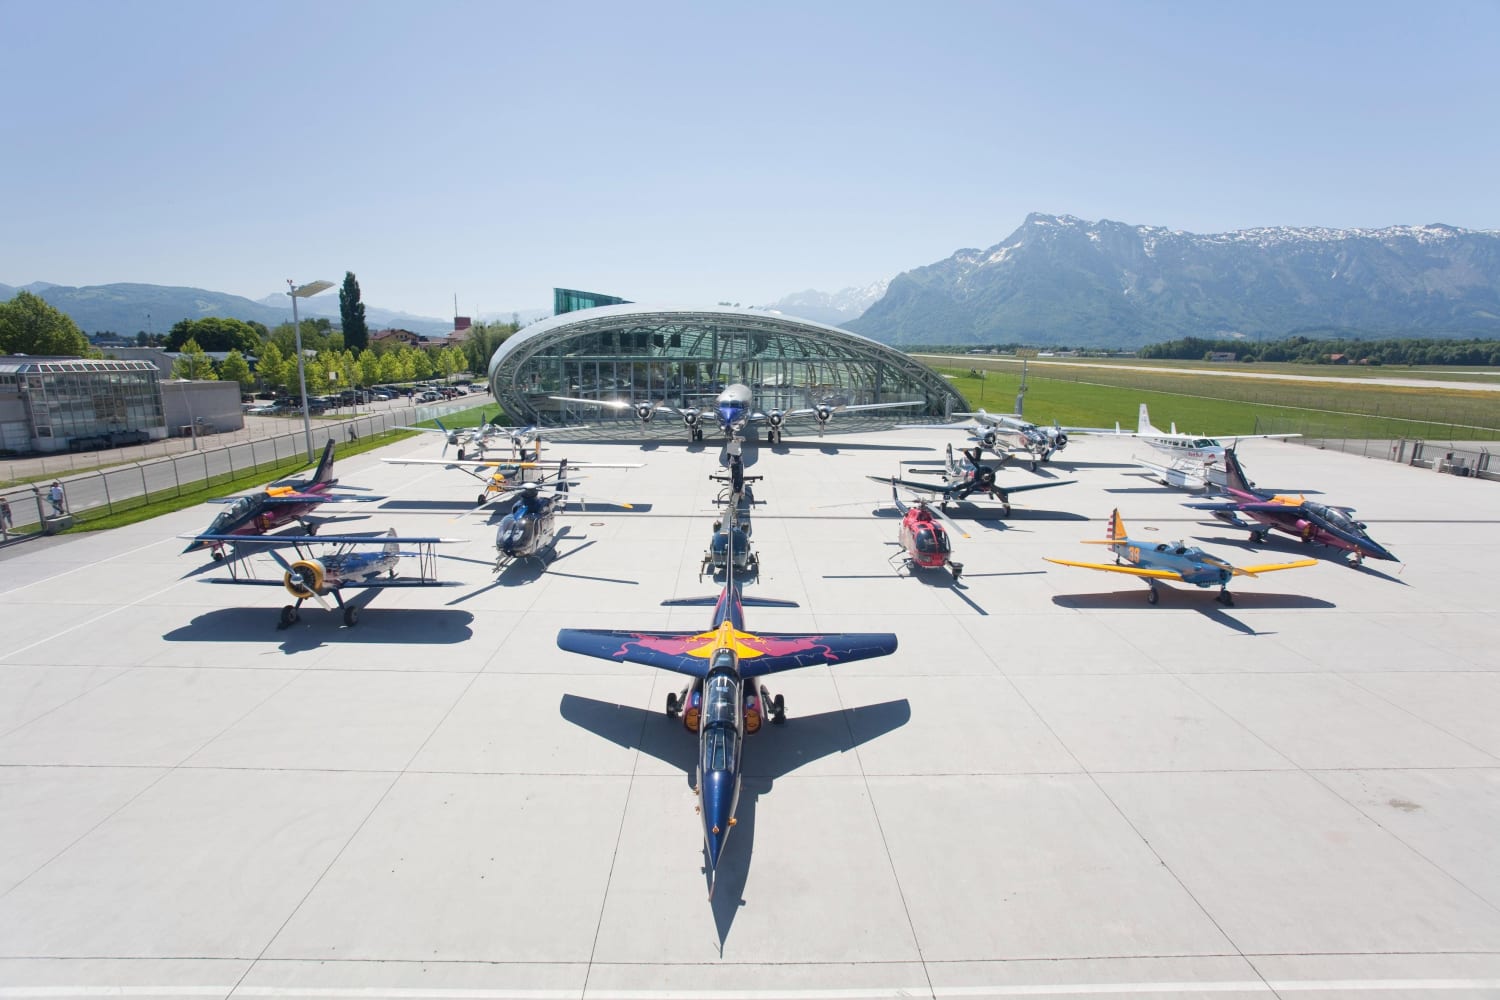 One of a kind: These aircraft remain flying rarities